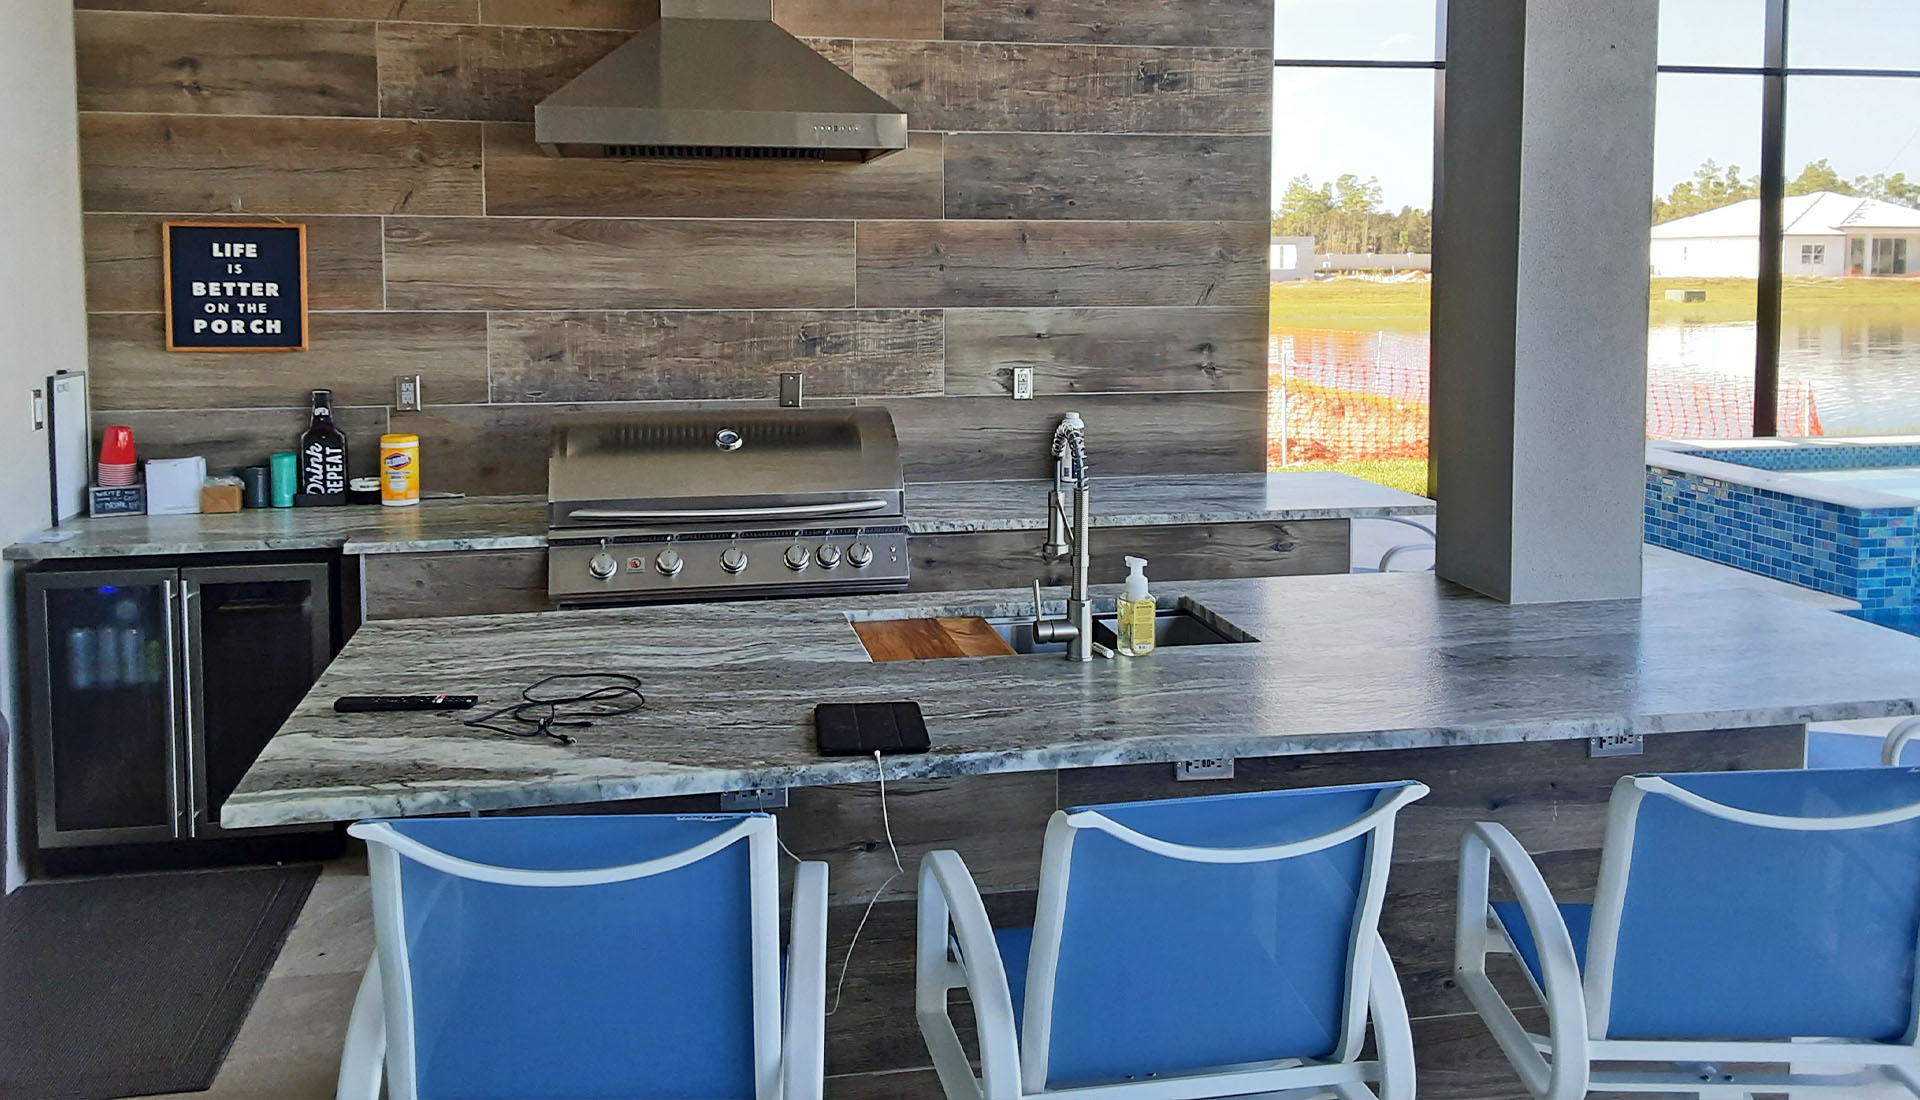 Custom Outdoor Kitchen design with island, grill and fridge by Pool and Deck Concepts